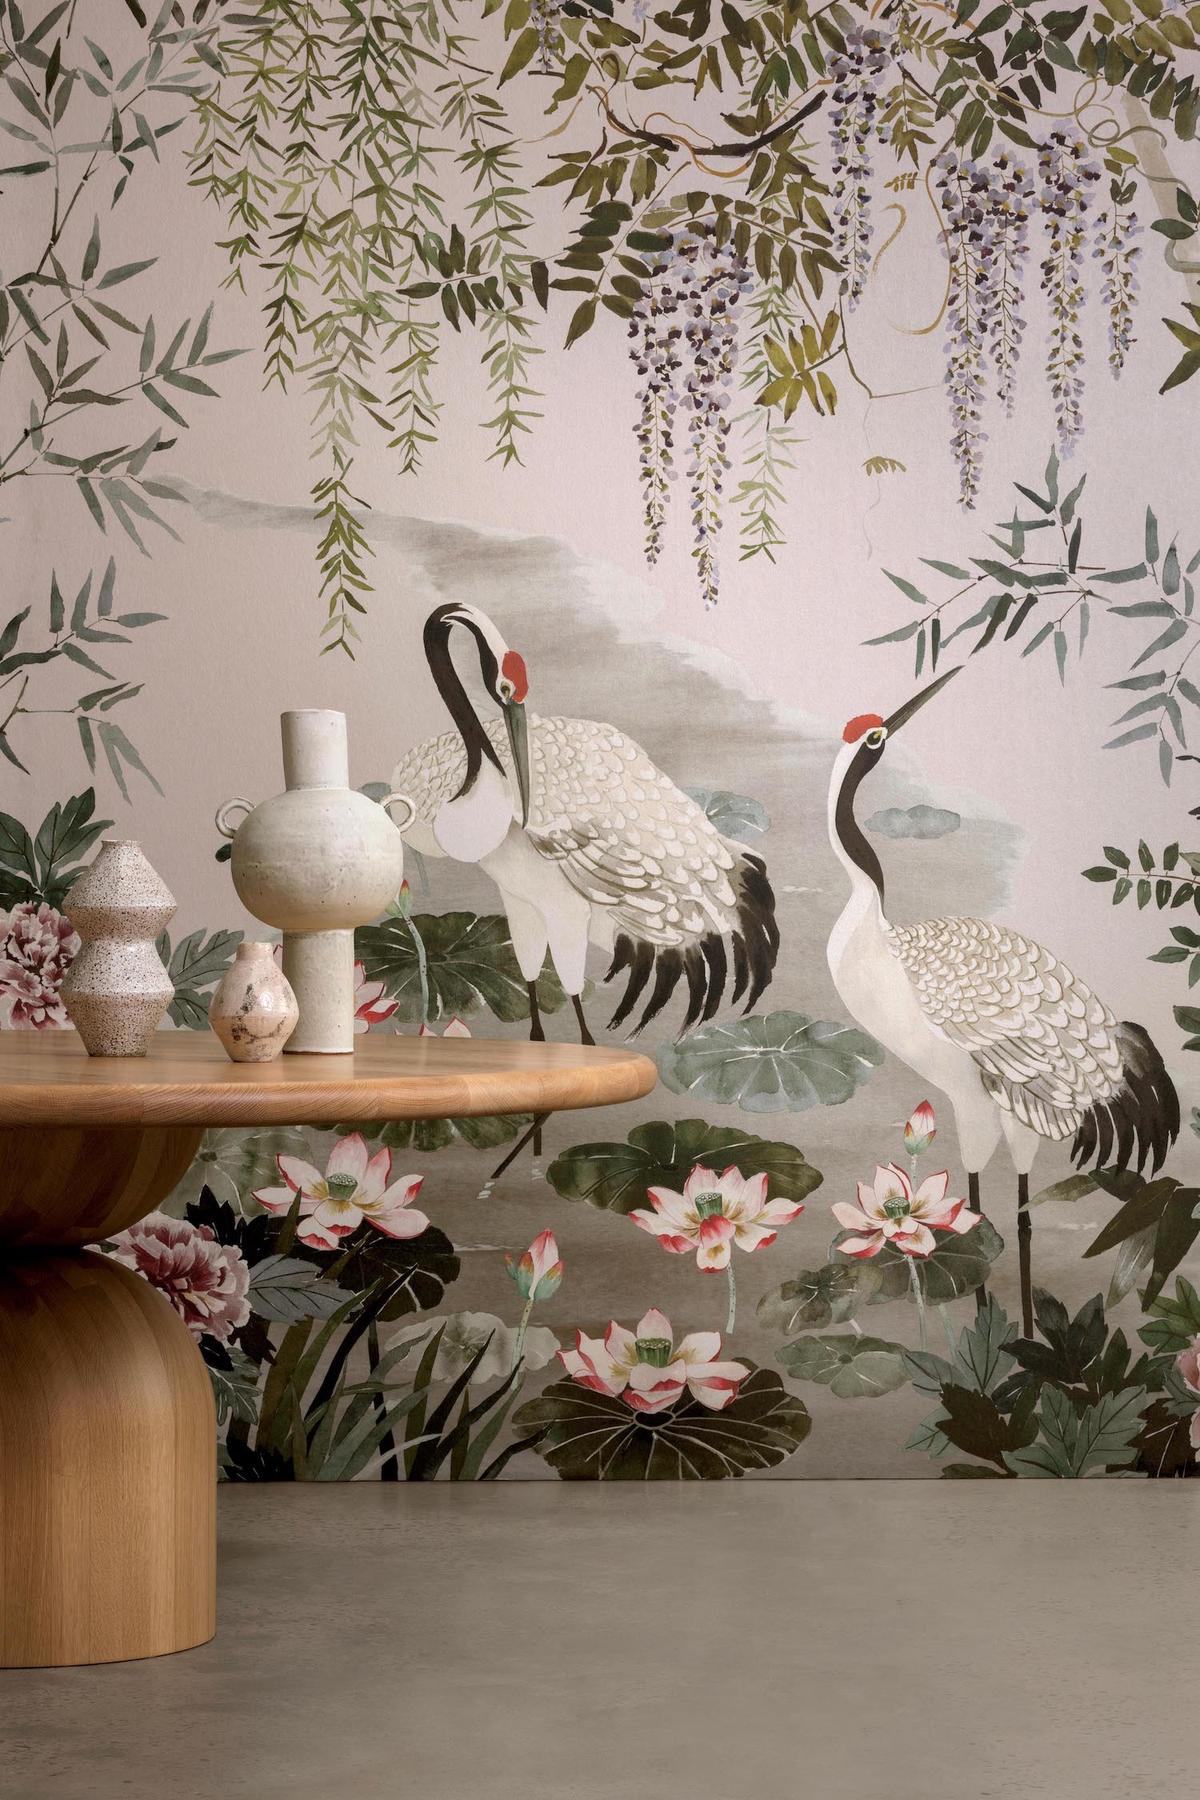 Flight of fancy: 7 decor accents with whimsical bird motifs